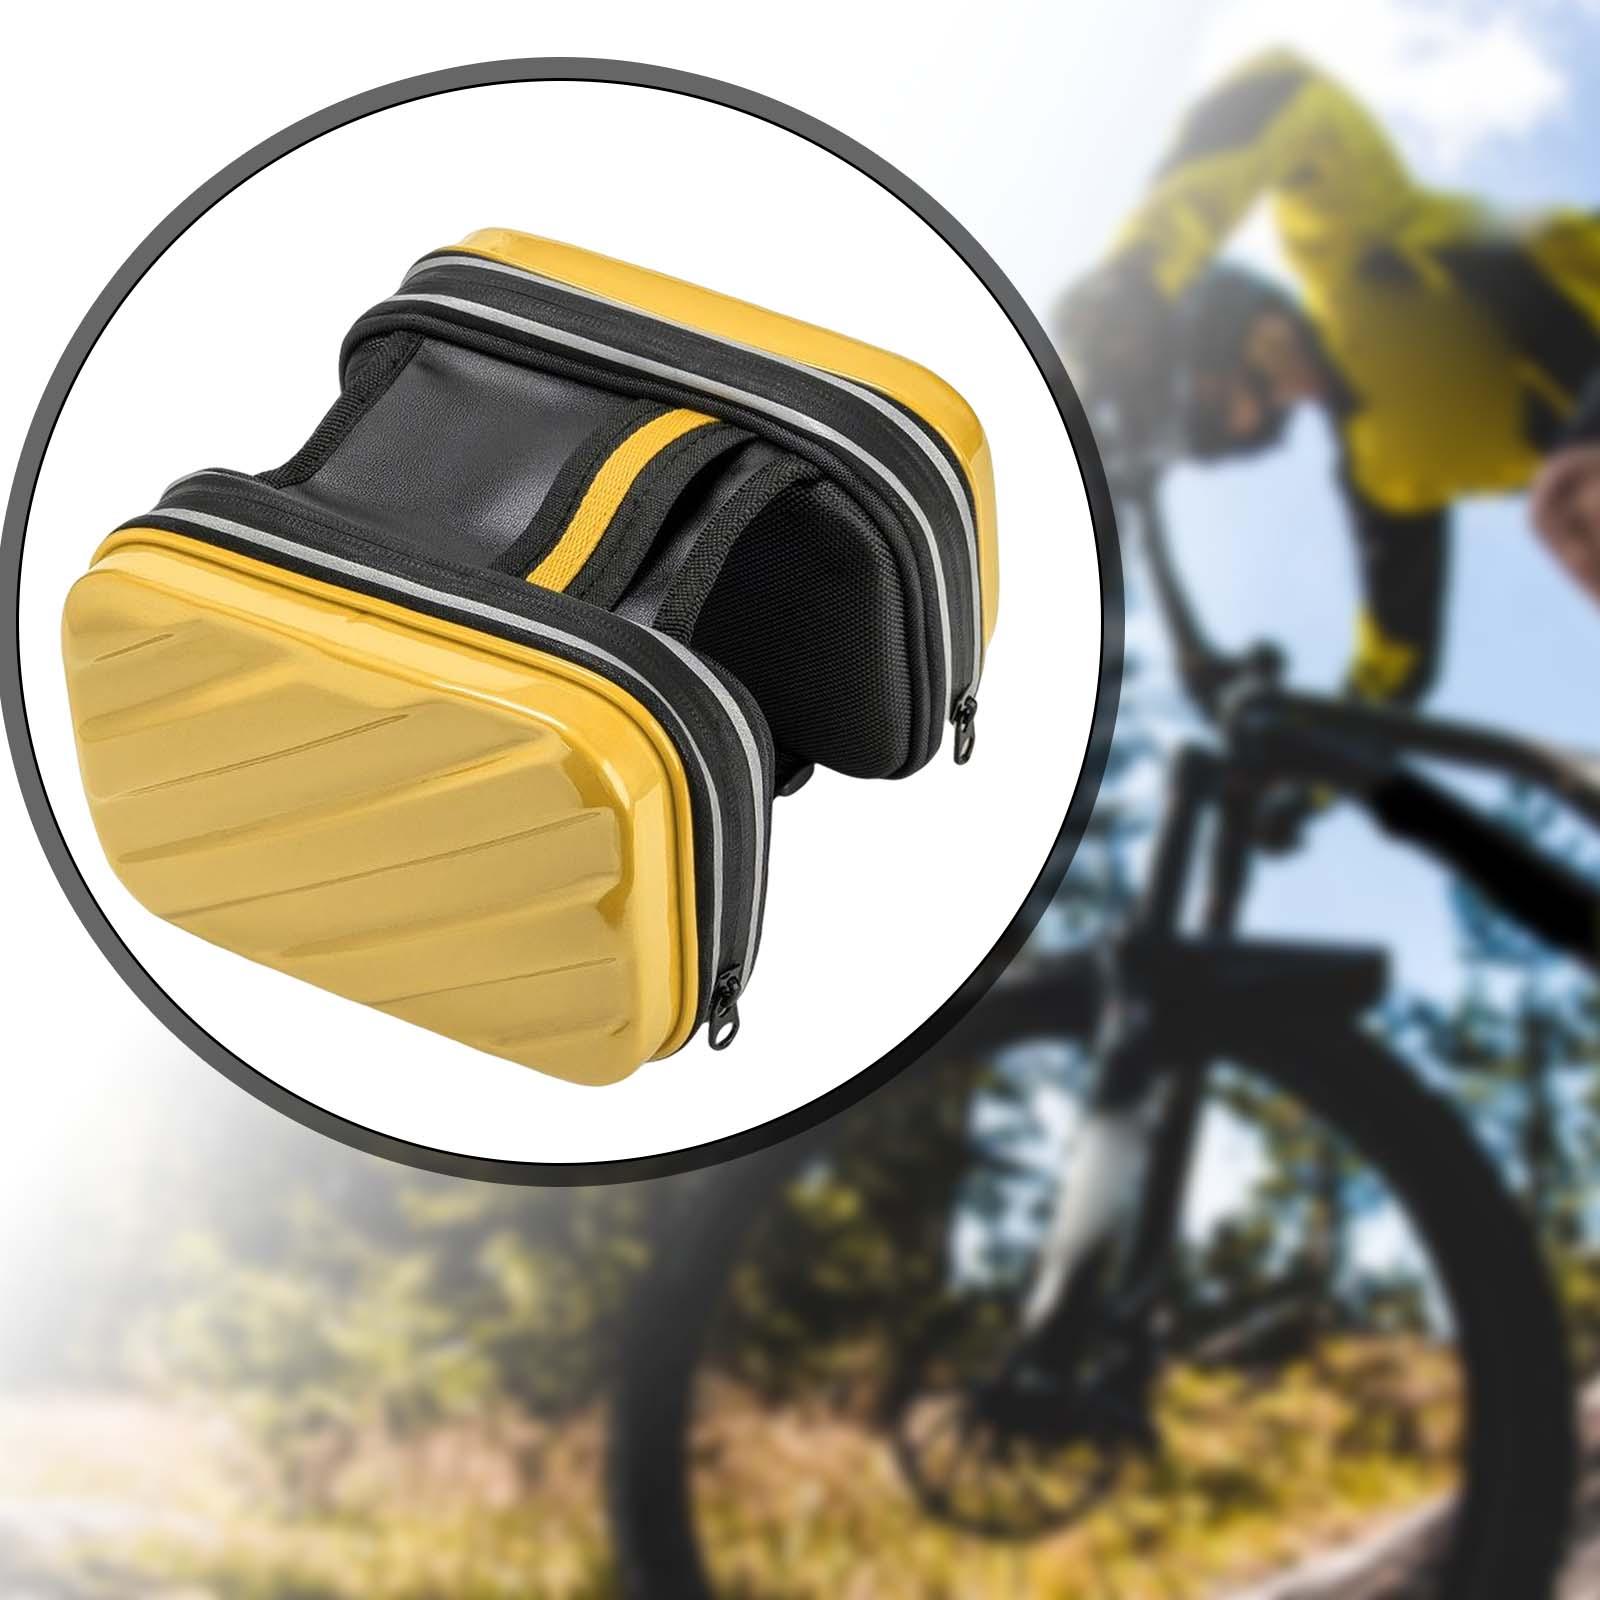 Hard Shell Bike Frame Front Bag Large Capacity for Keys Small Tools Storage Yellow